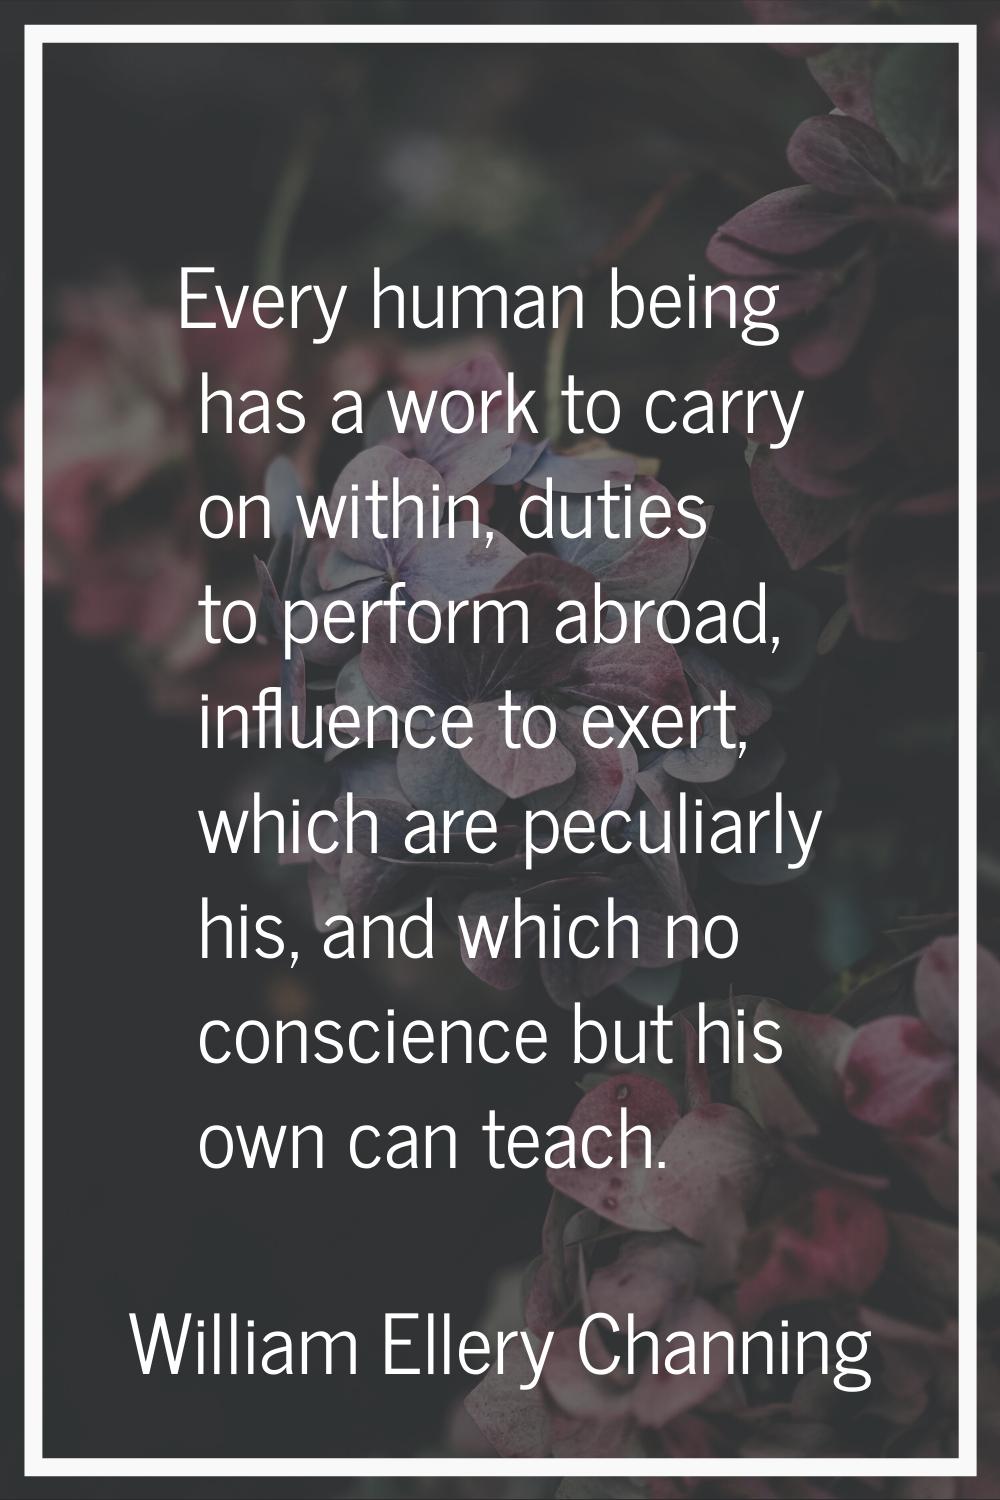 Every human being has a work to carry on within, duties to perform abroad, influence to exert, whic